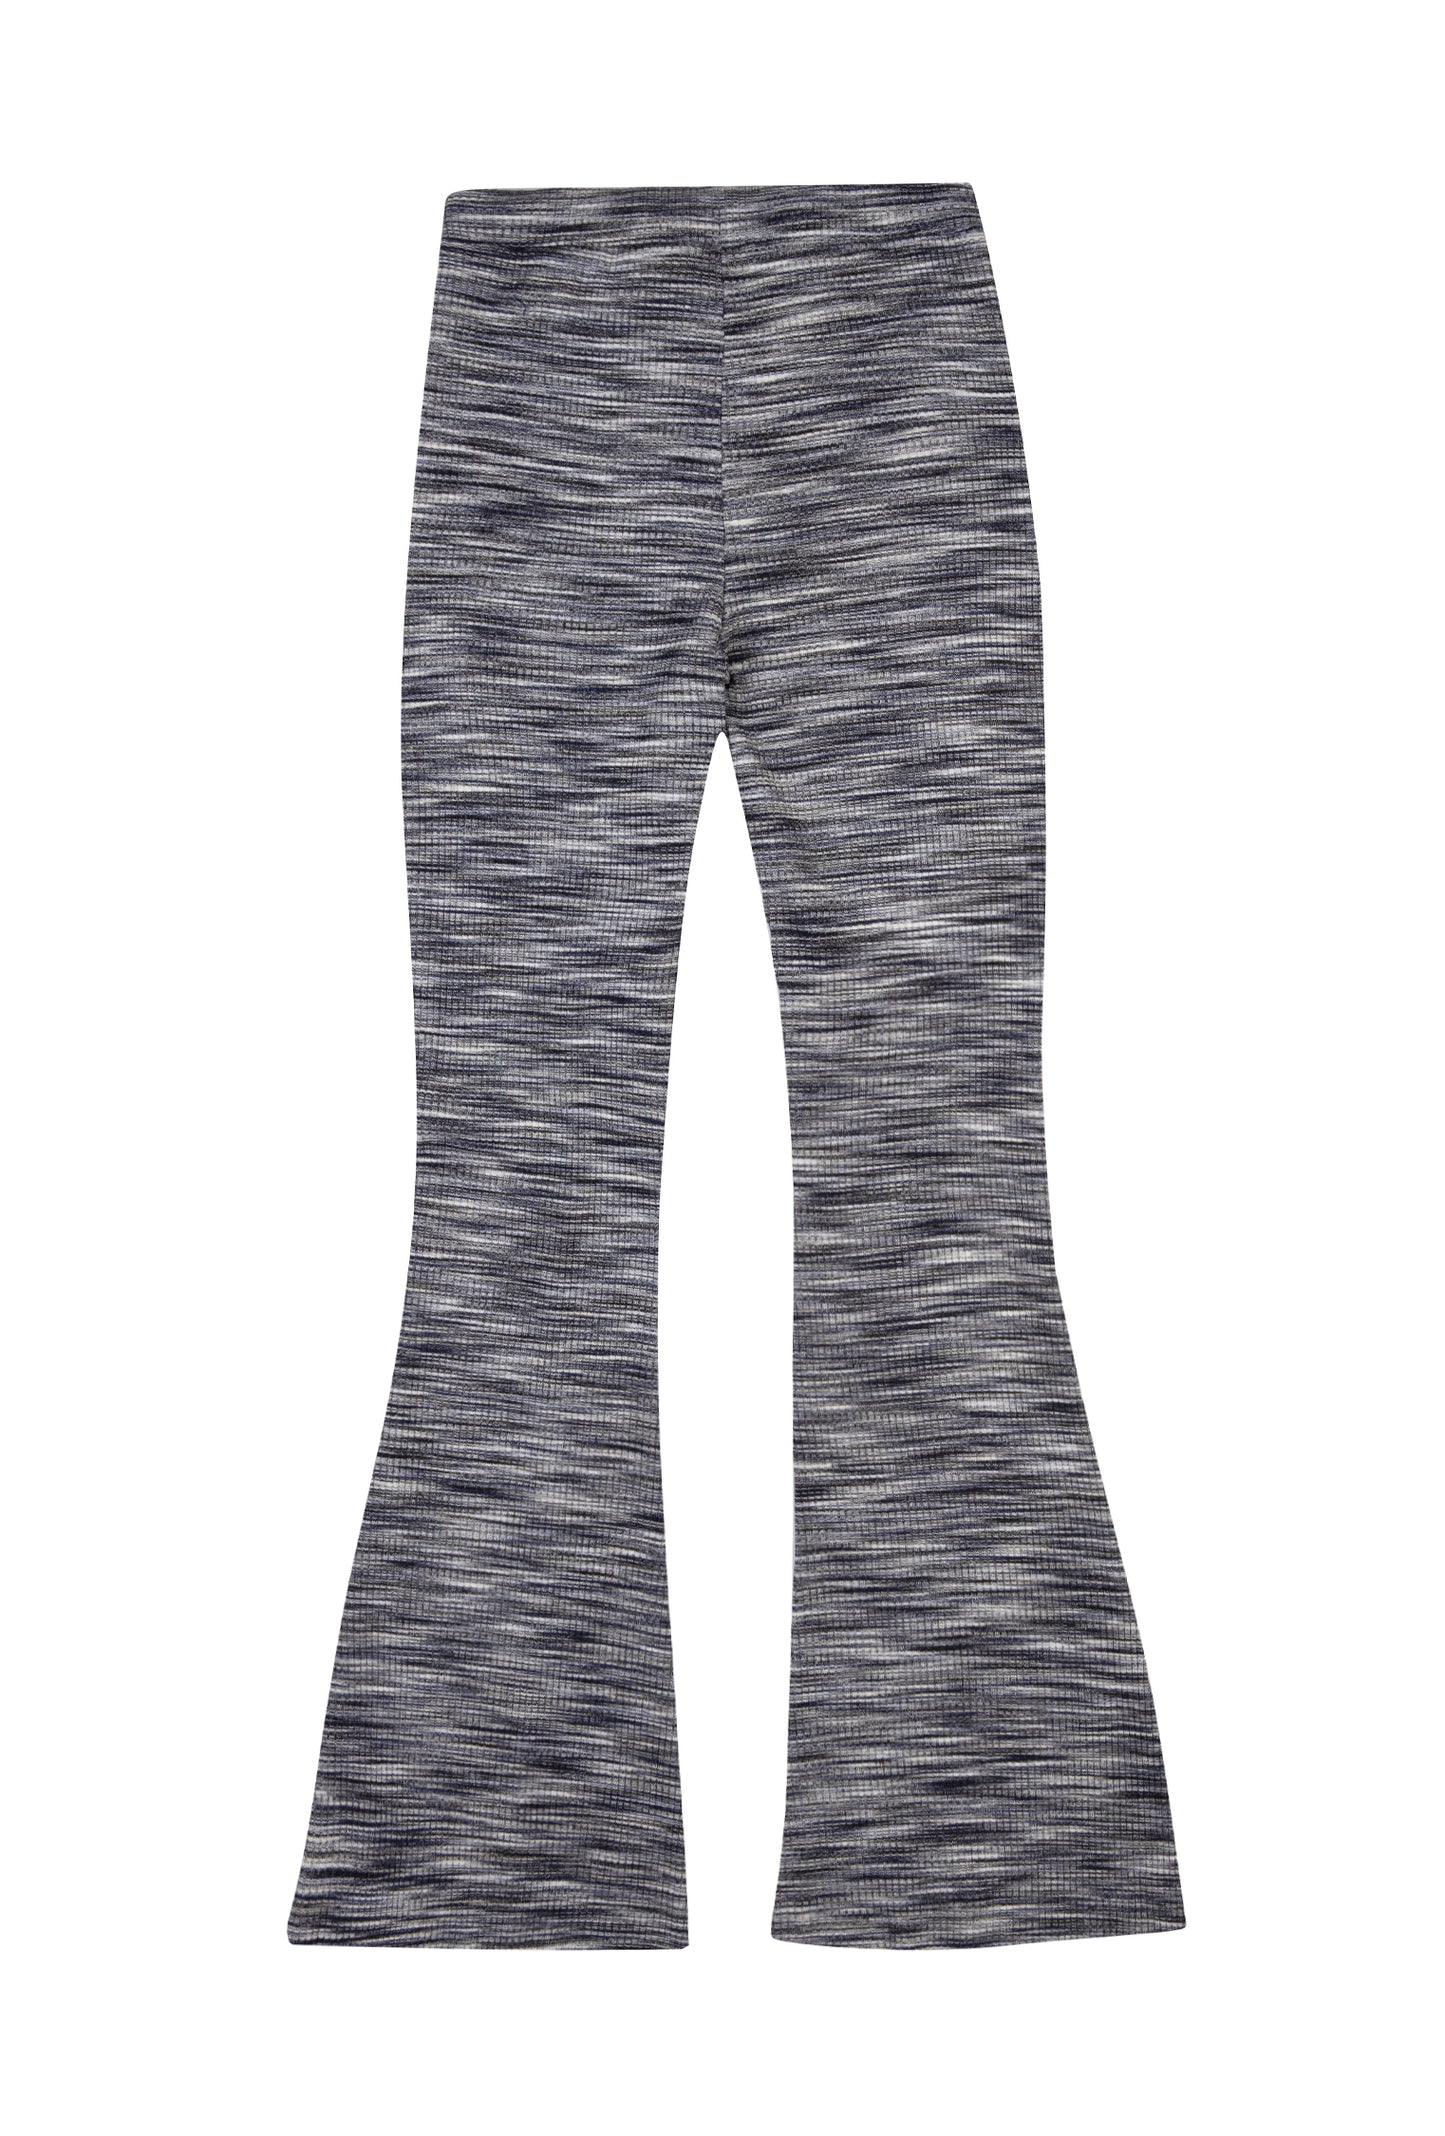 Load image into Gallery viewer, Knit Flare Sweatpants - Blueberry
